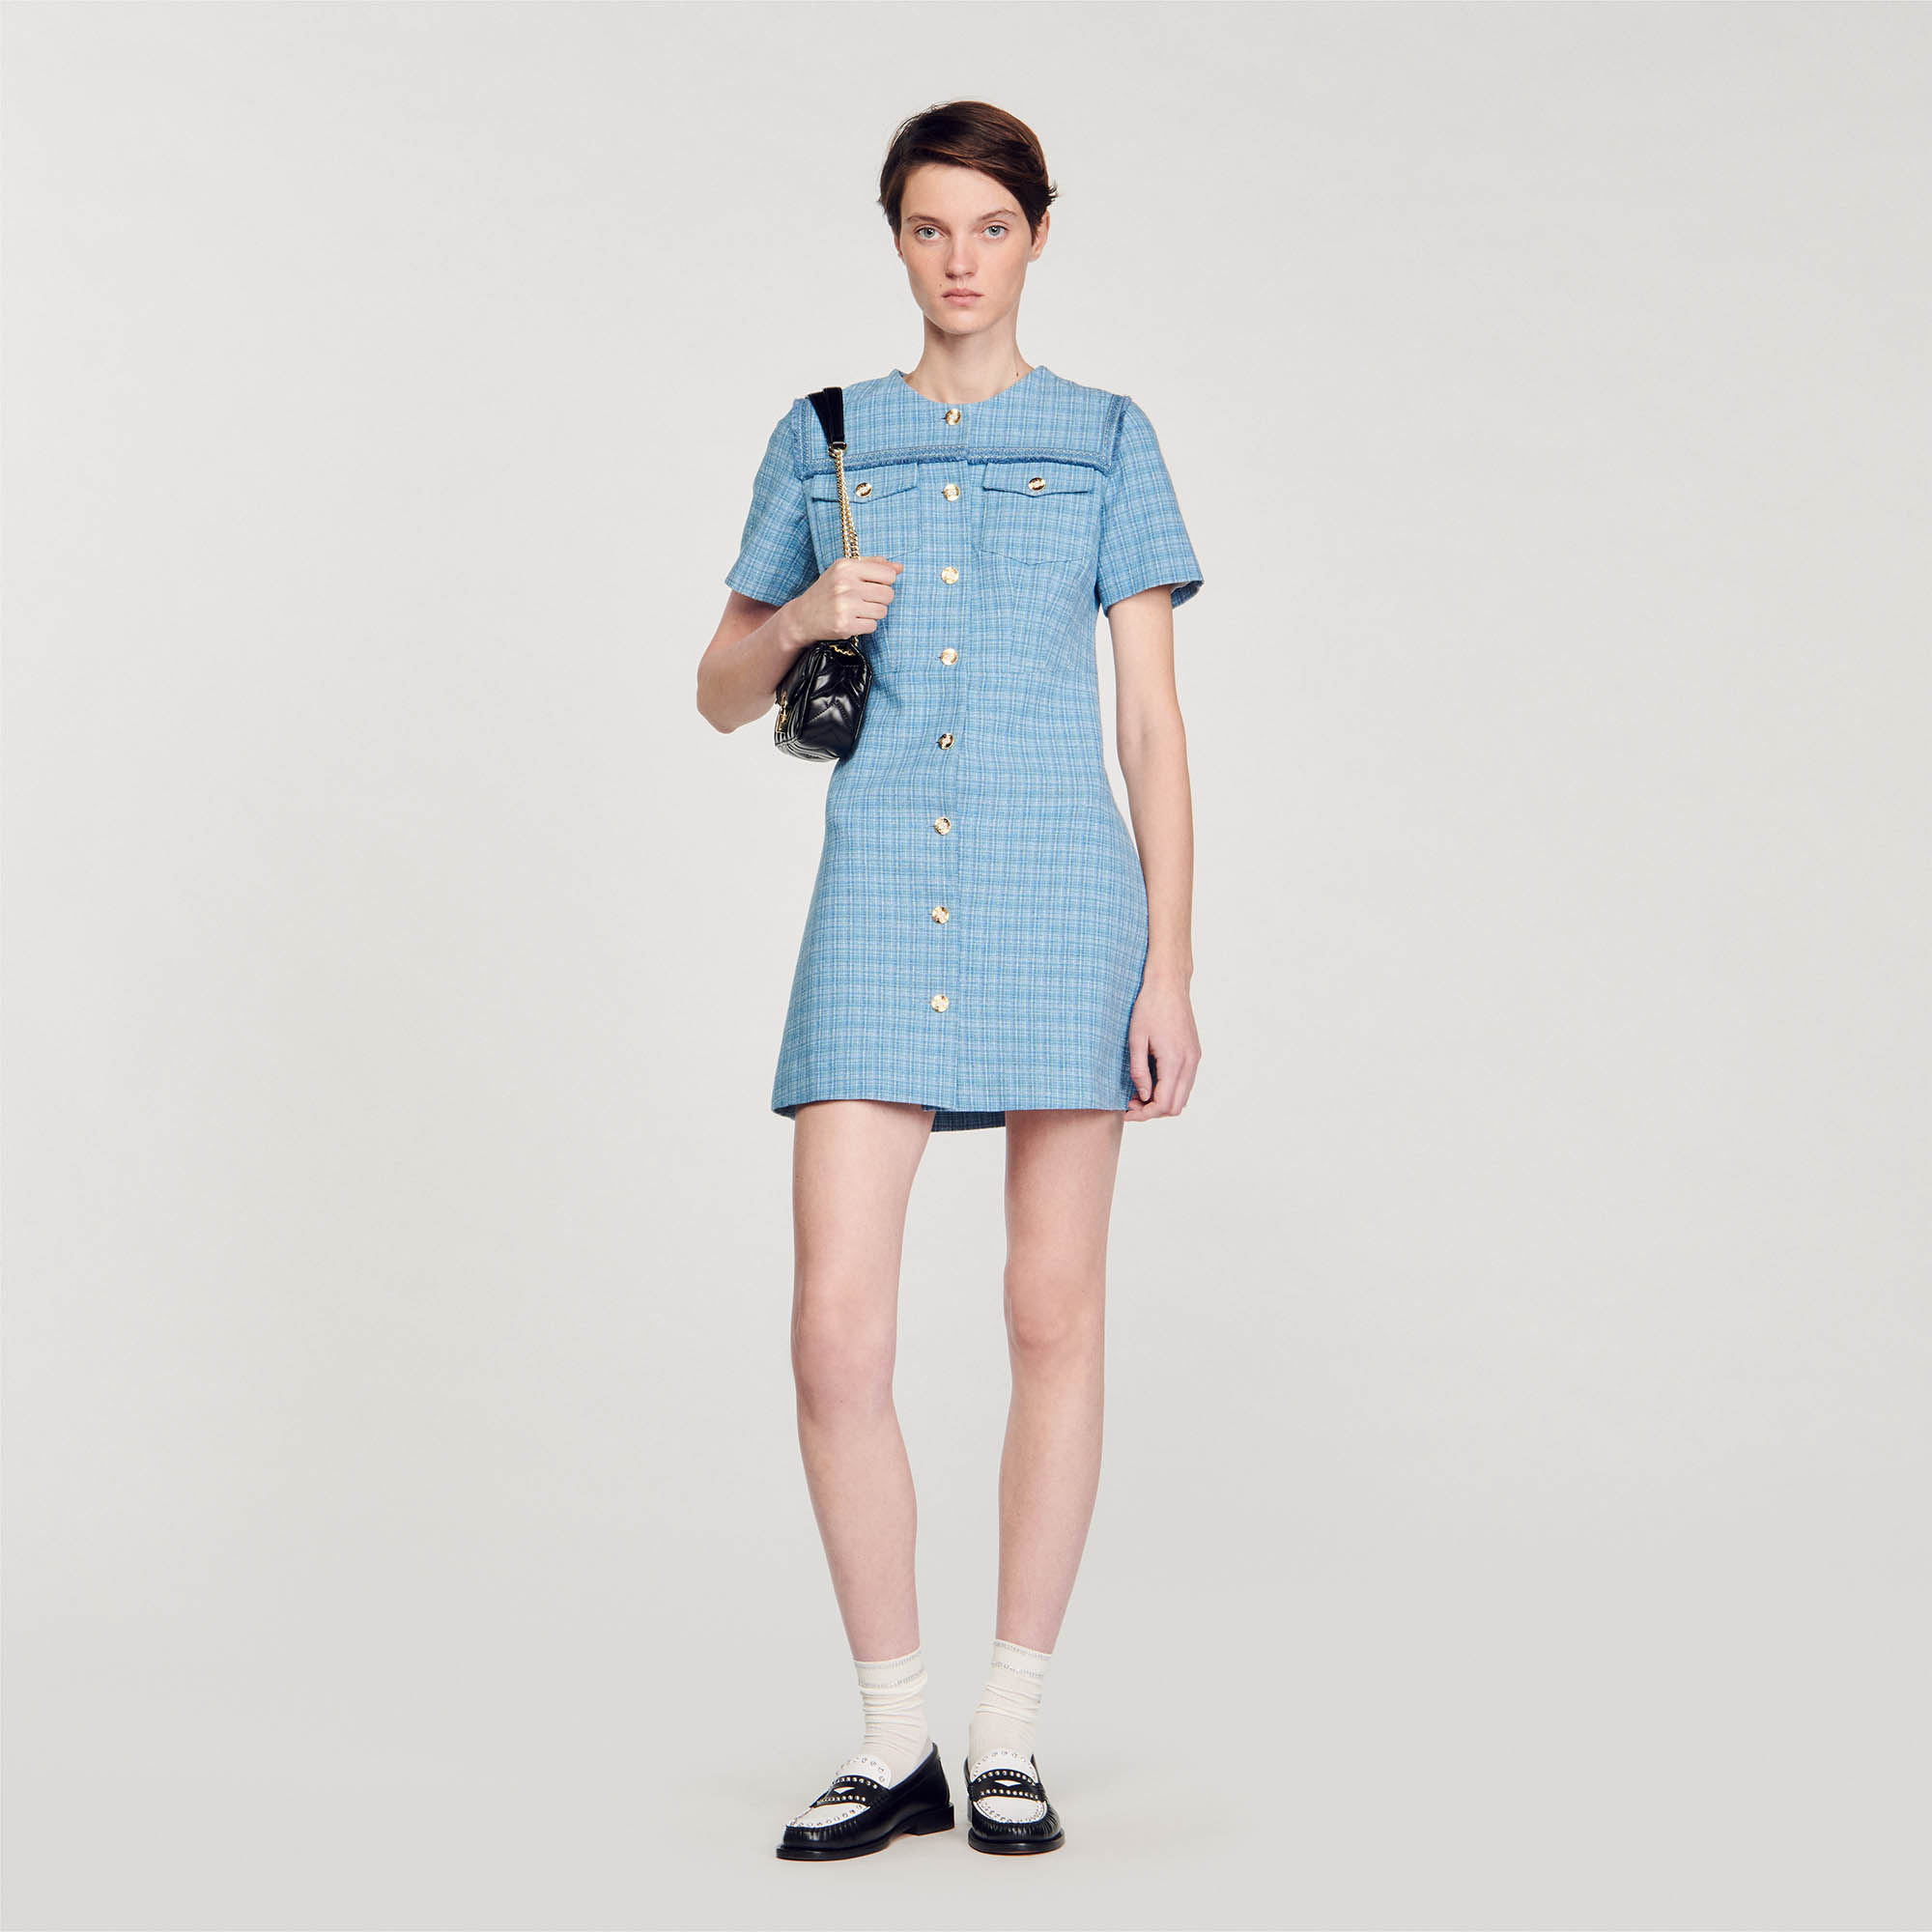 Sandro cotton Short tweed dress, fit and flare style, featuring a round neck, button fastening, short sleeves, and a flared skirt, embellished with fringed details on the neckline and patch pockets with gold buttons